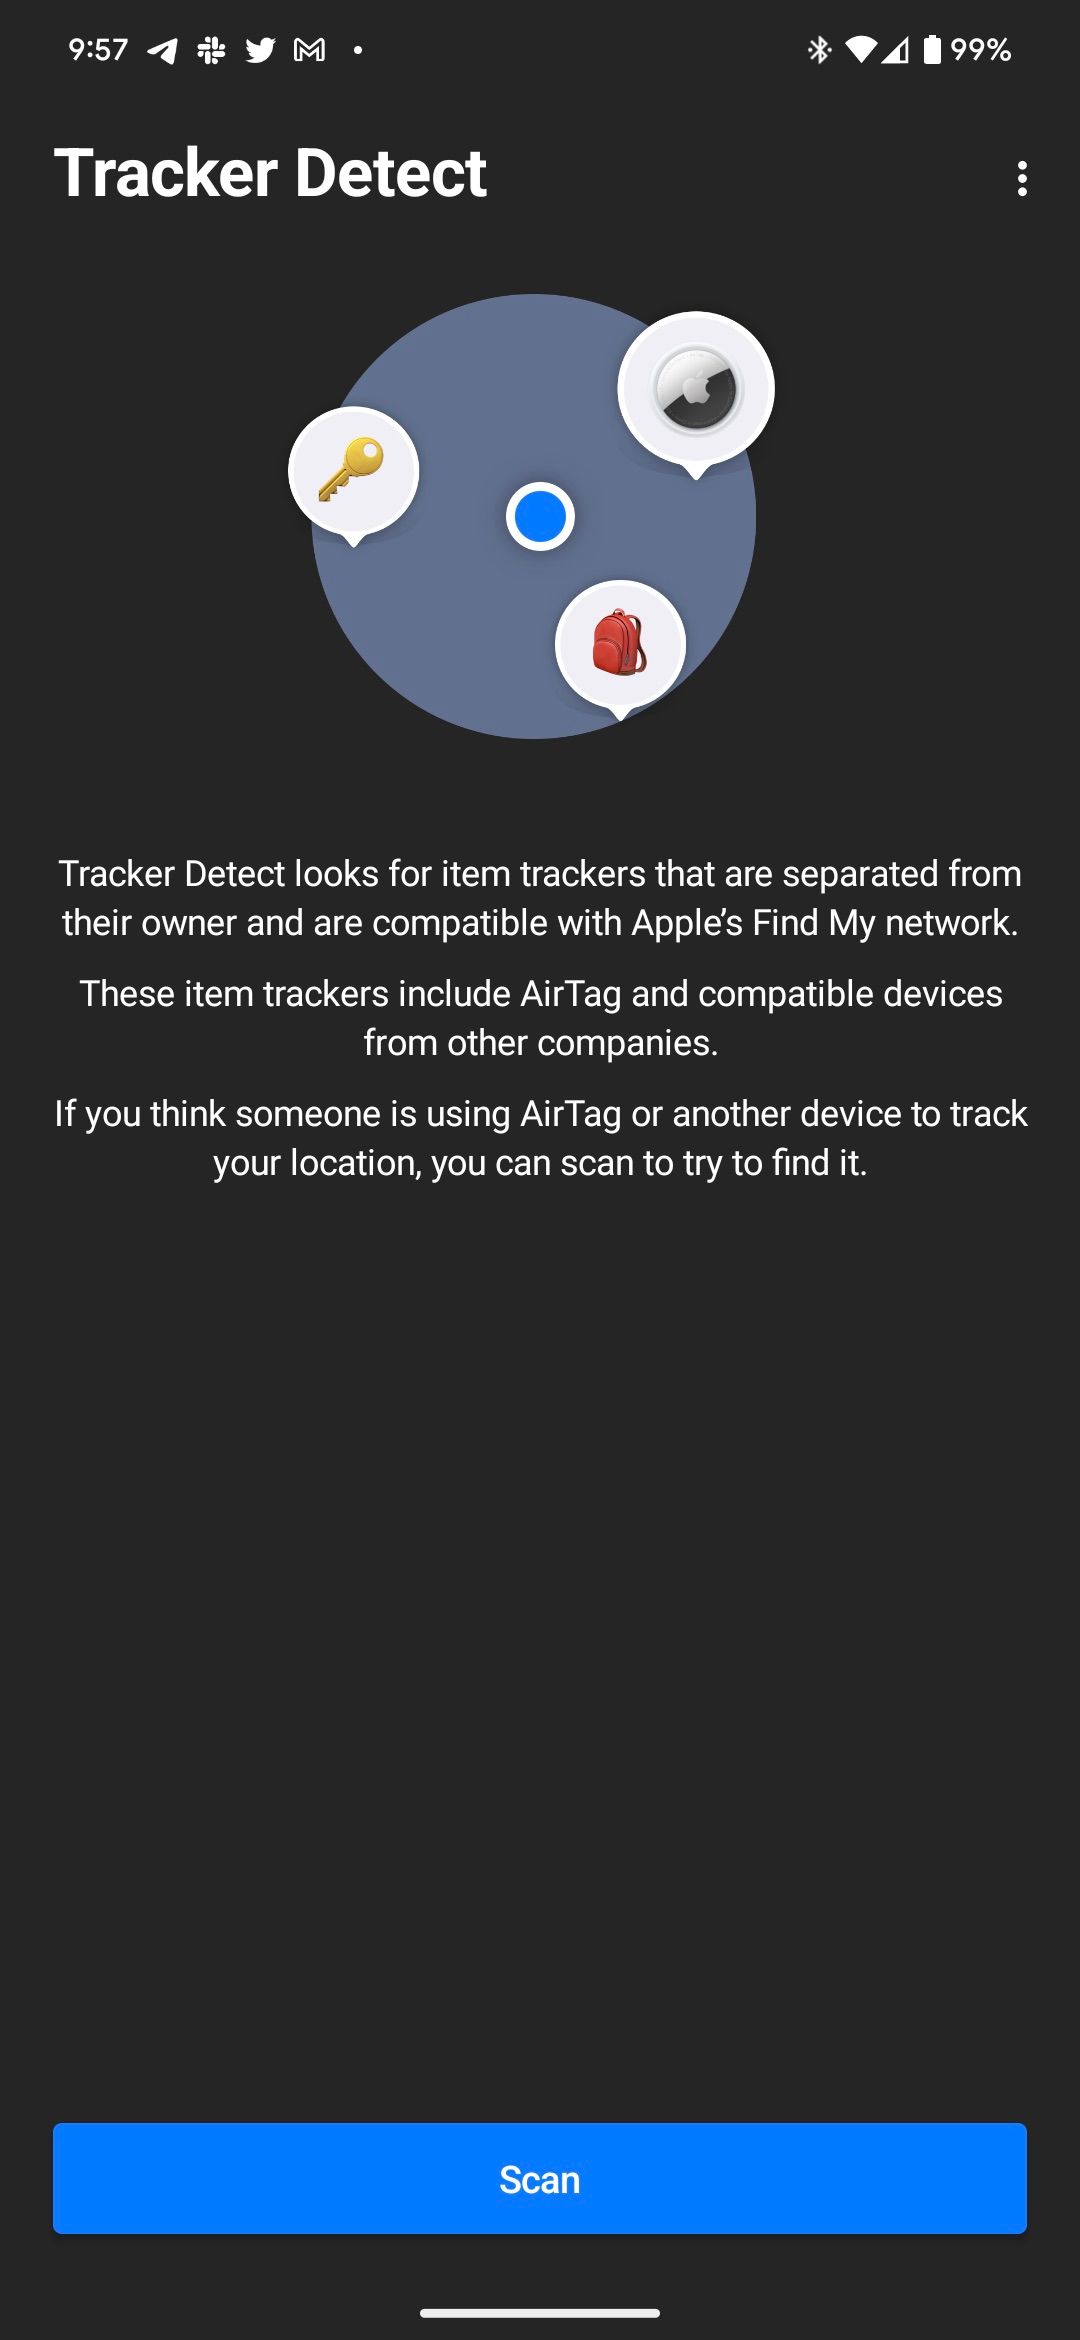 Here's how to use Apple's Tracker Detect Android app to find nearby AirTags